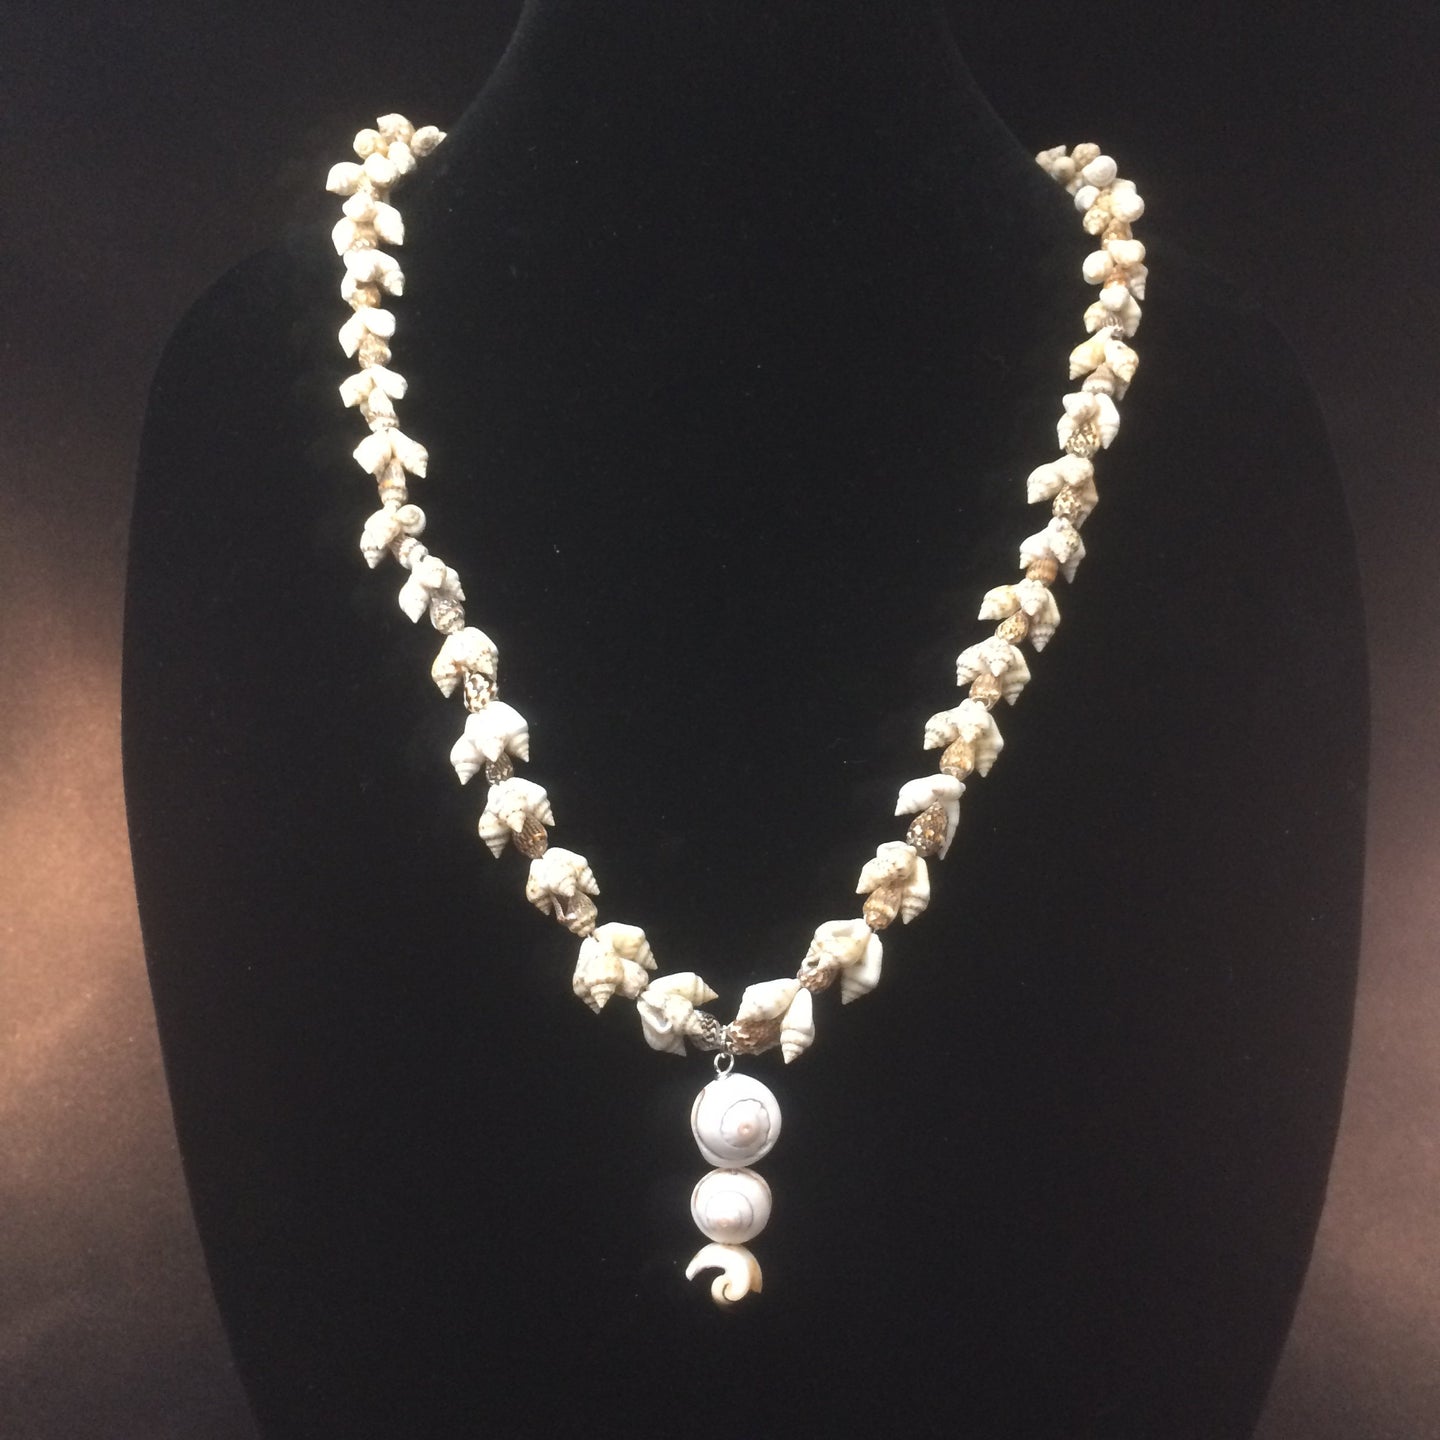 This necklace has clusters of light snail shells with a pendant made from segments of larger shells.